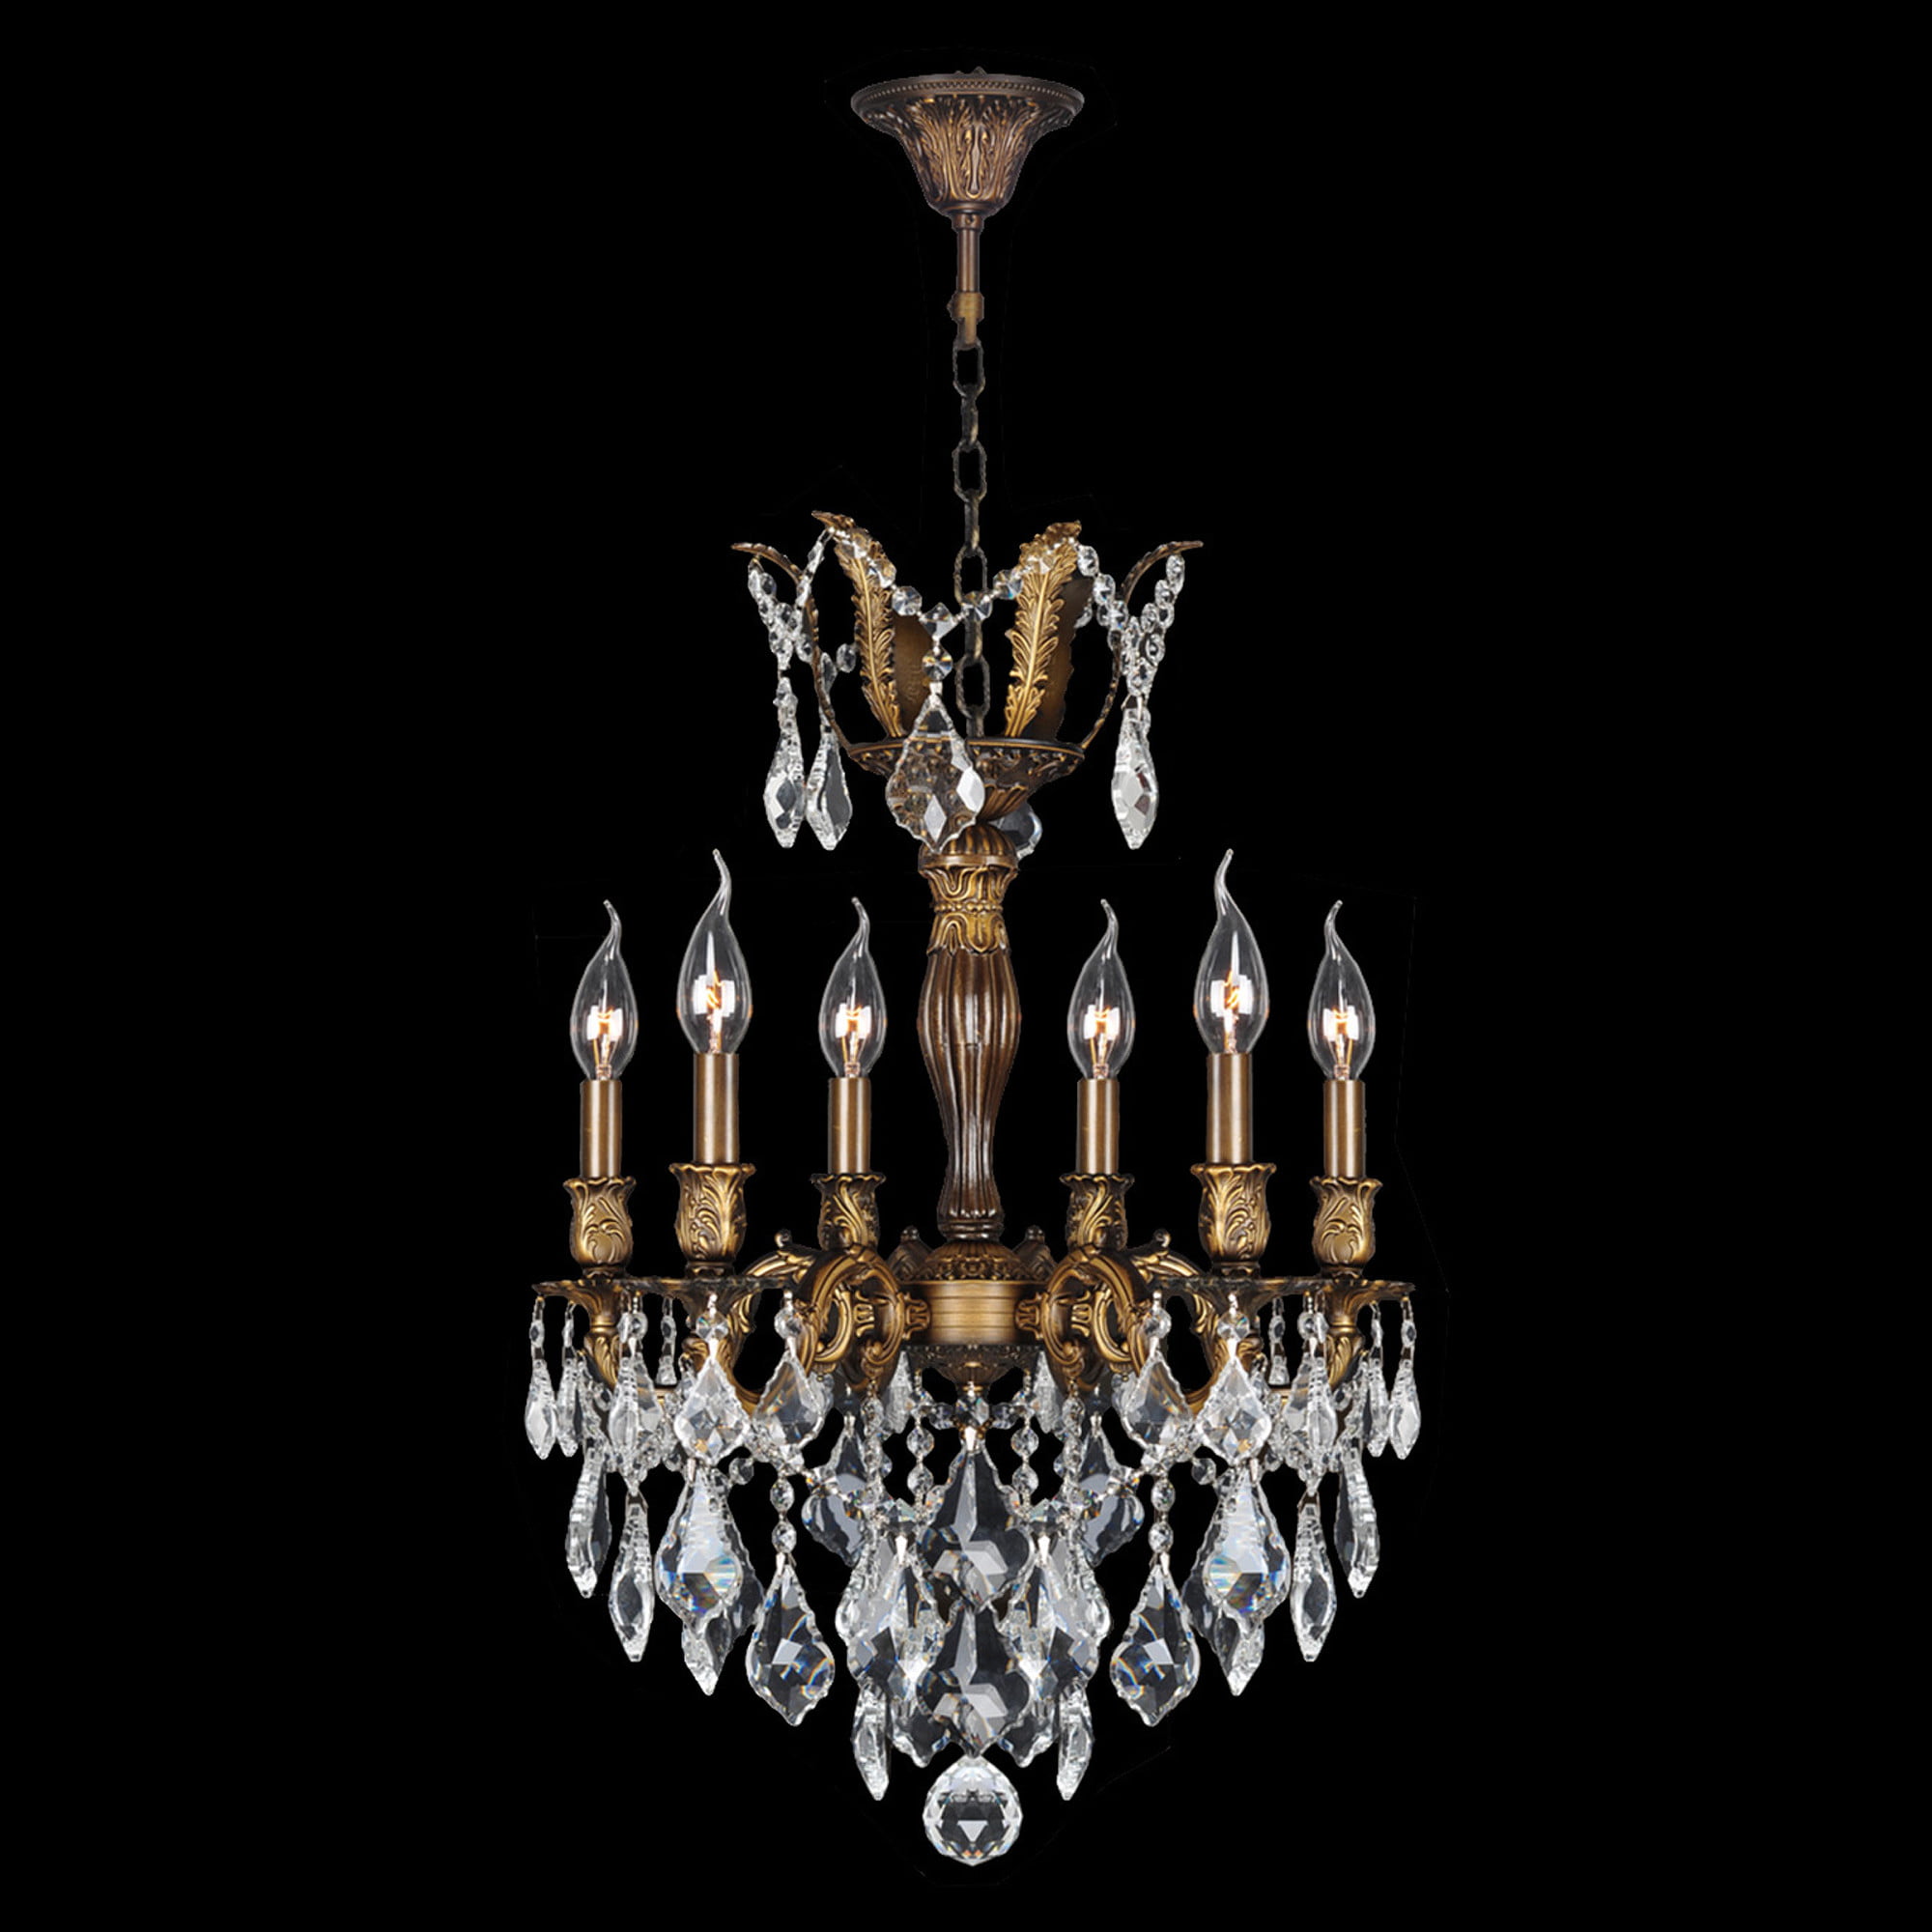 Versailles Collection 6 Light Antique Bronze Finish and Clear Crystal Chandelier 19